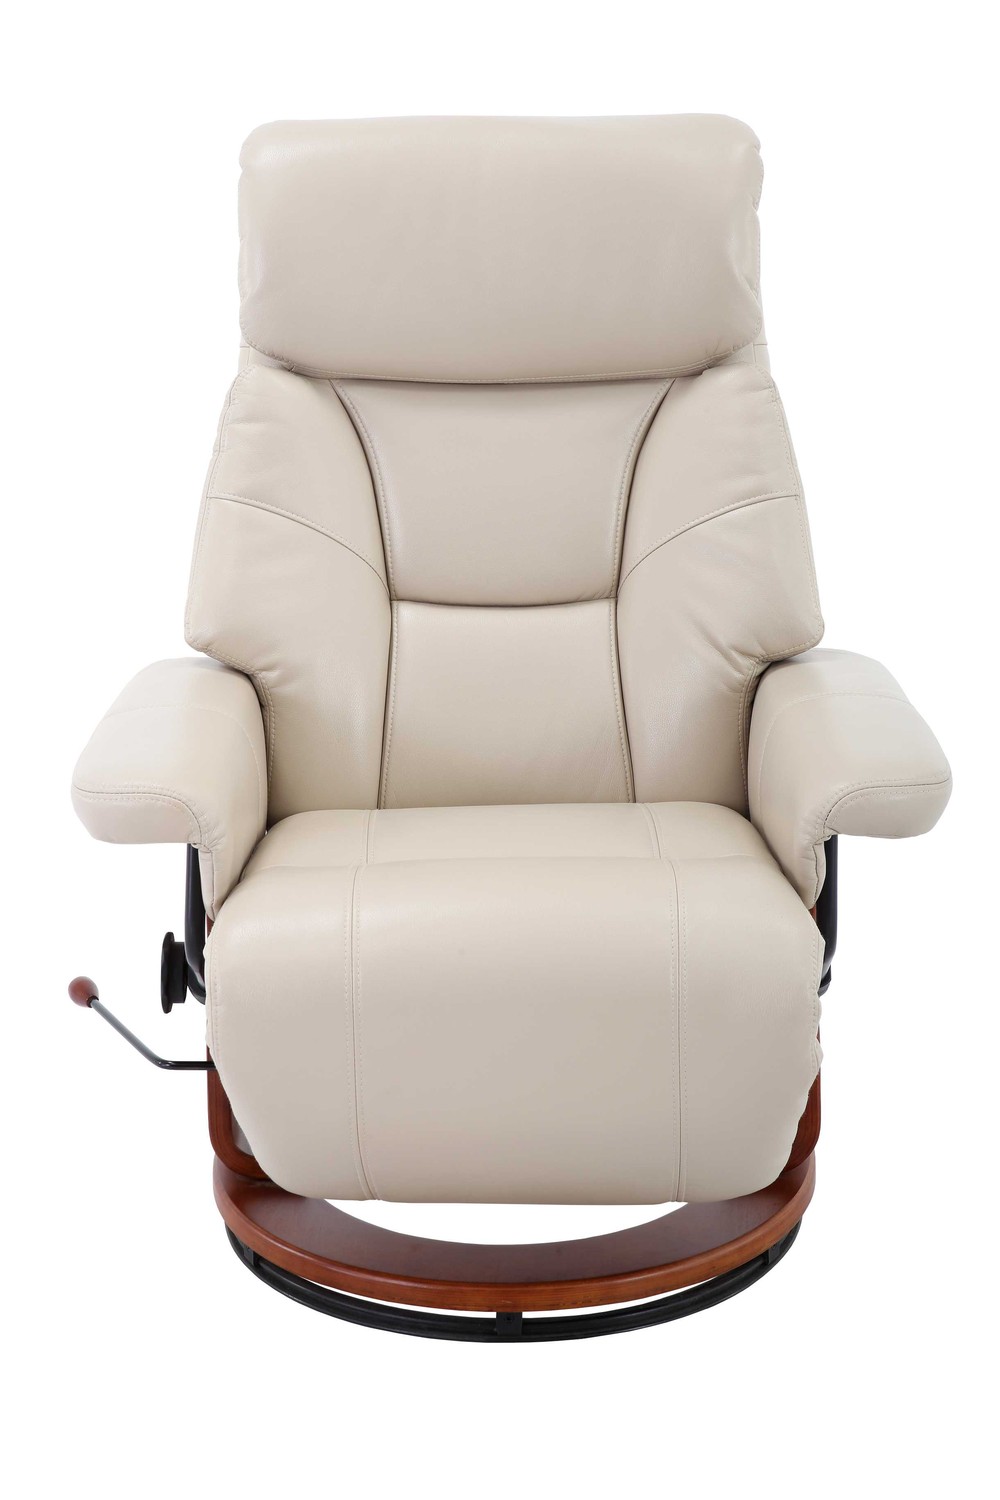 Off White Soft Faux Leather Swivel Recliner Chair